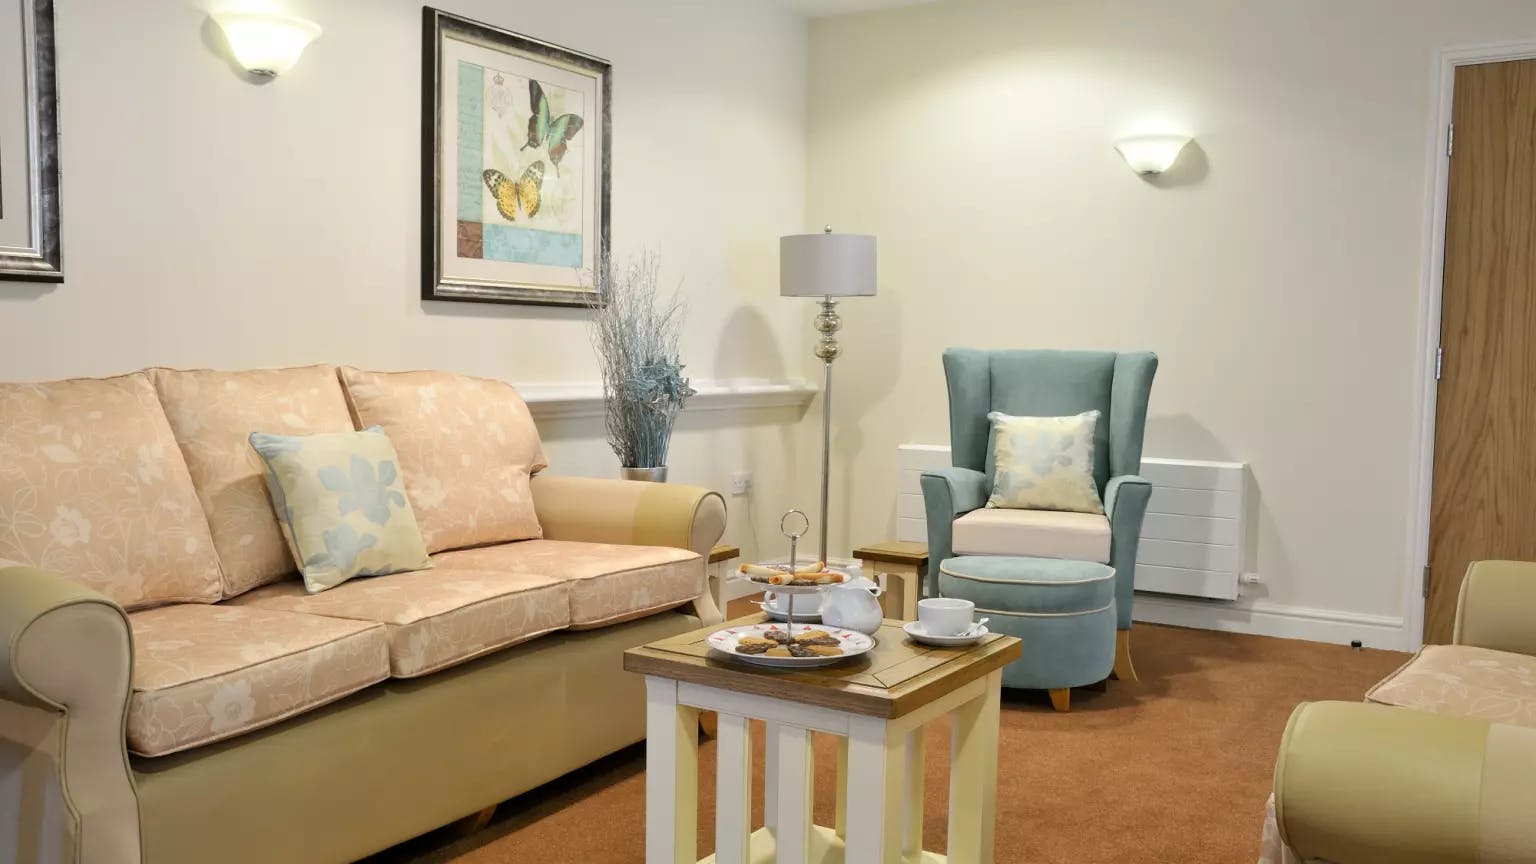 Lounge of Jubilee Court care home in Stevenage, Hertfordshire